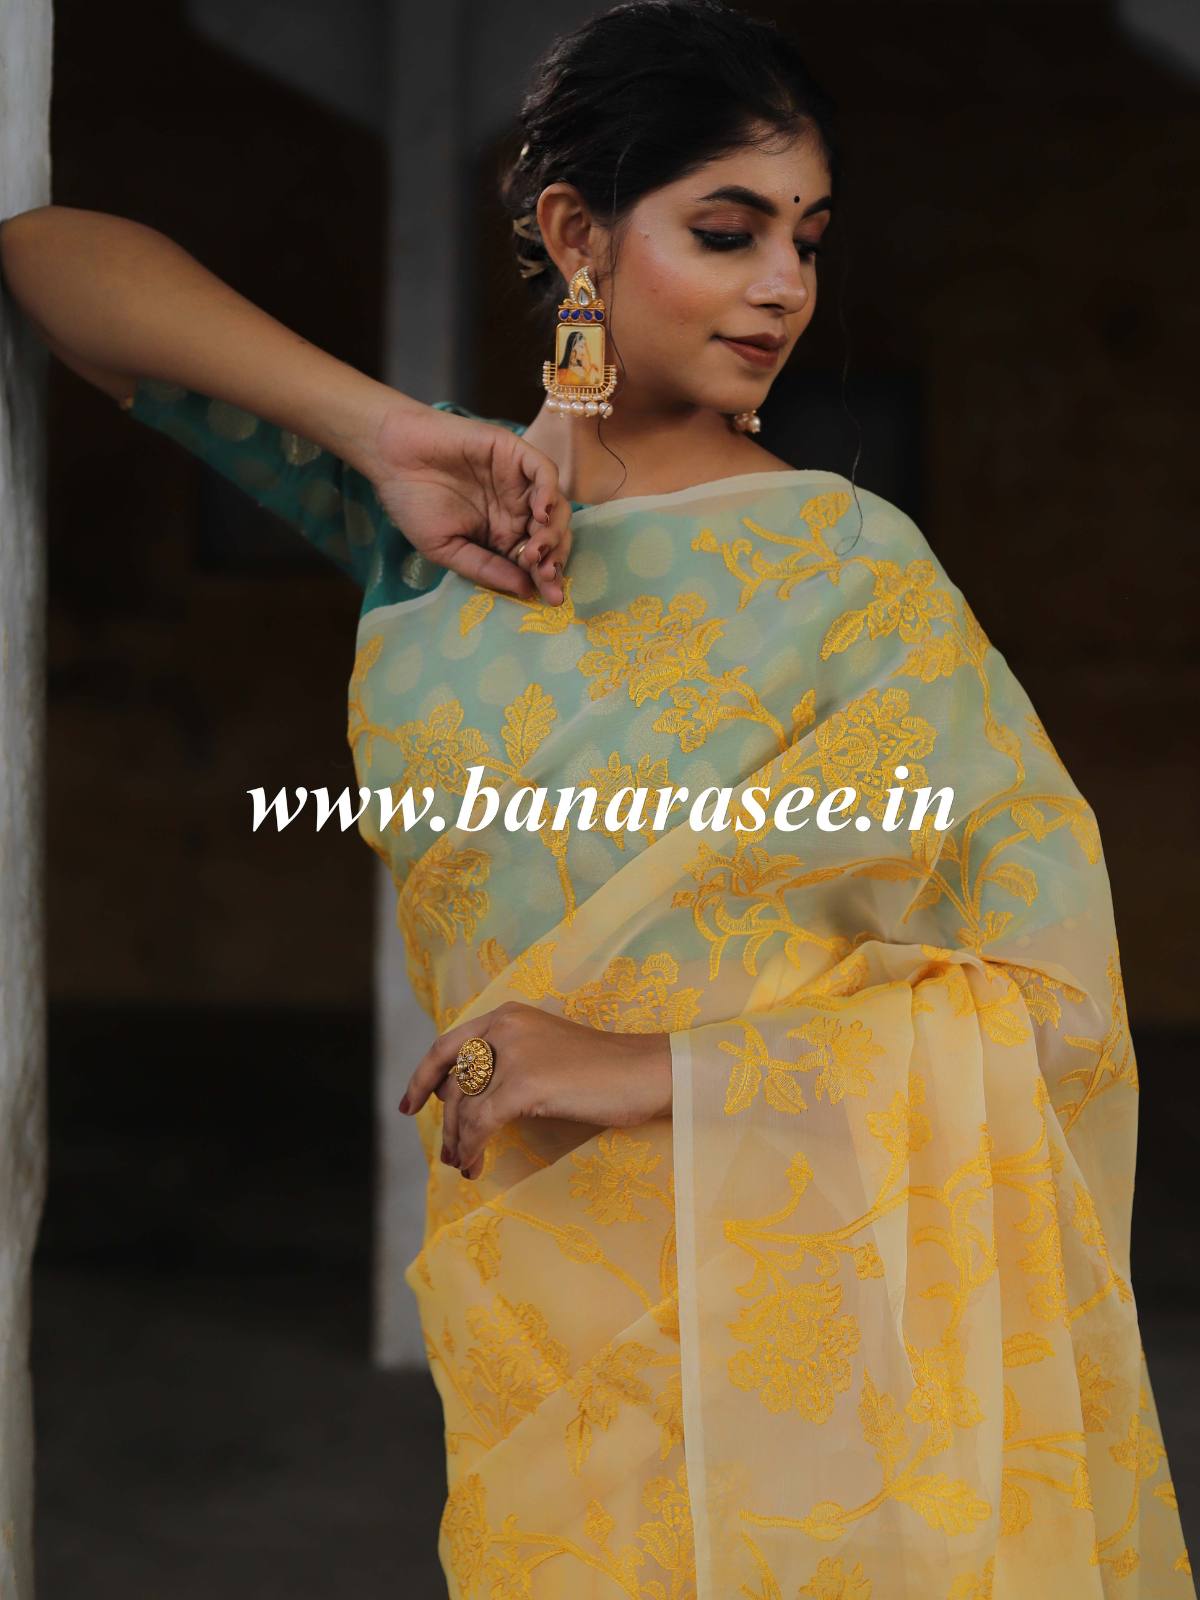 Banarasee Handwoven Organza Silk Embroidered Saree With Contrast Silk Cotton Blouse-Yellow & Green